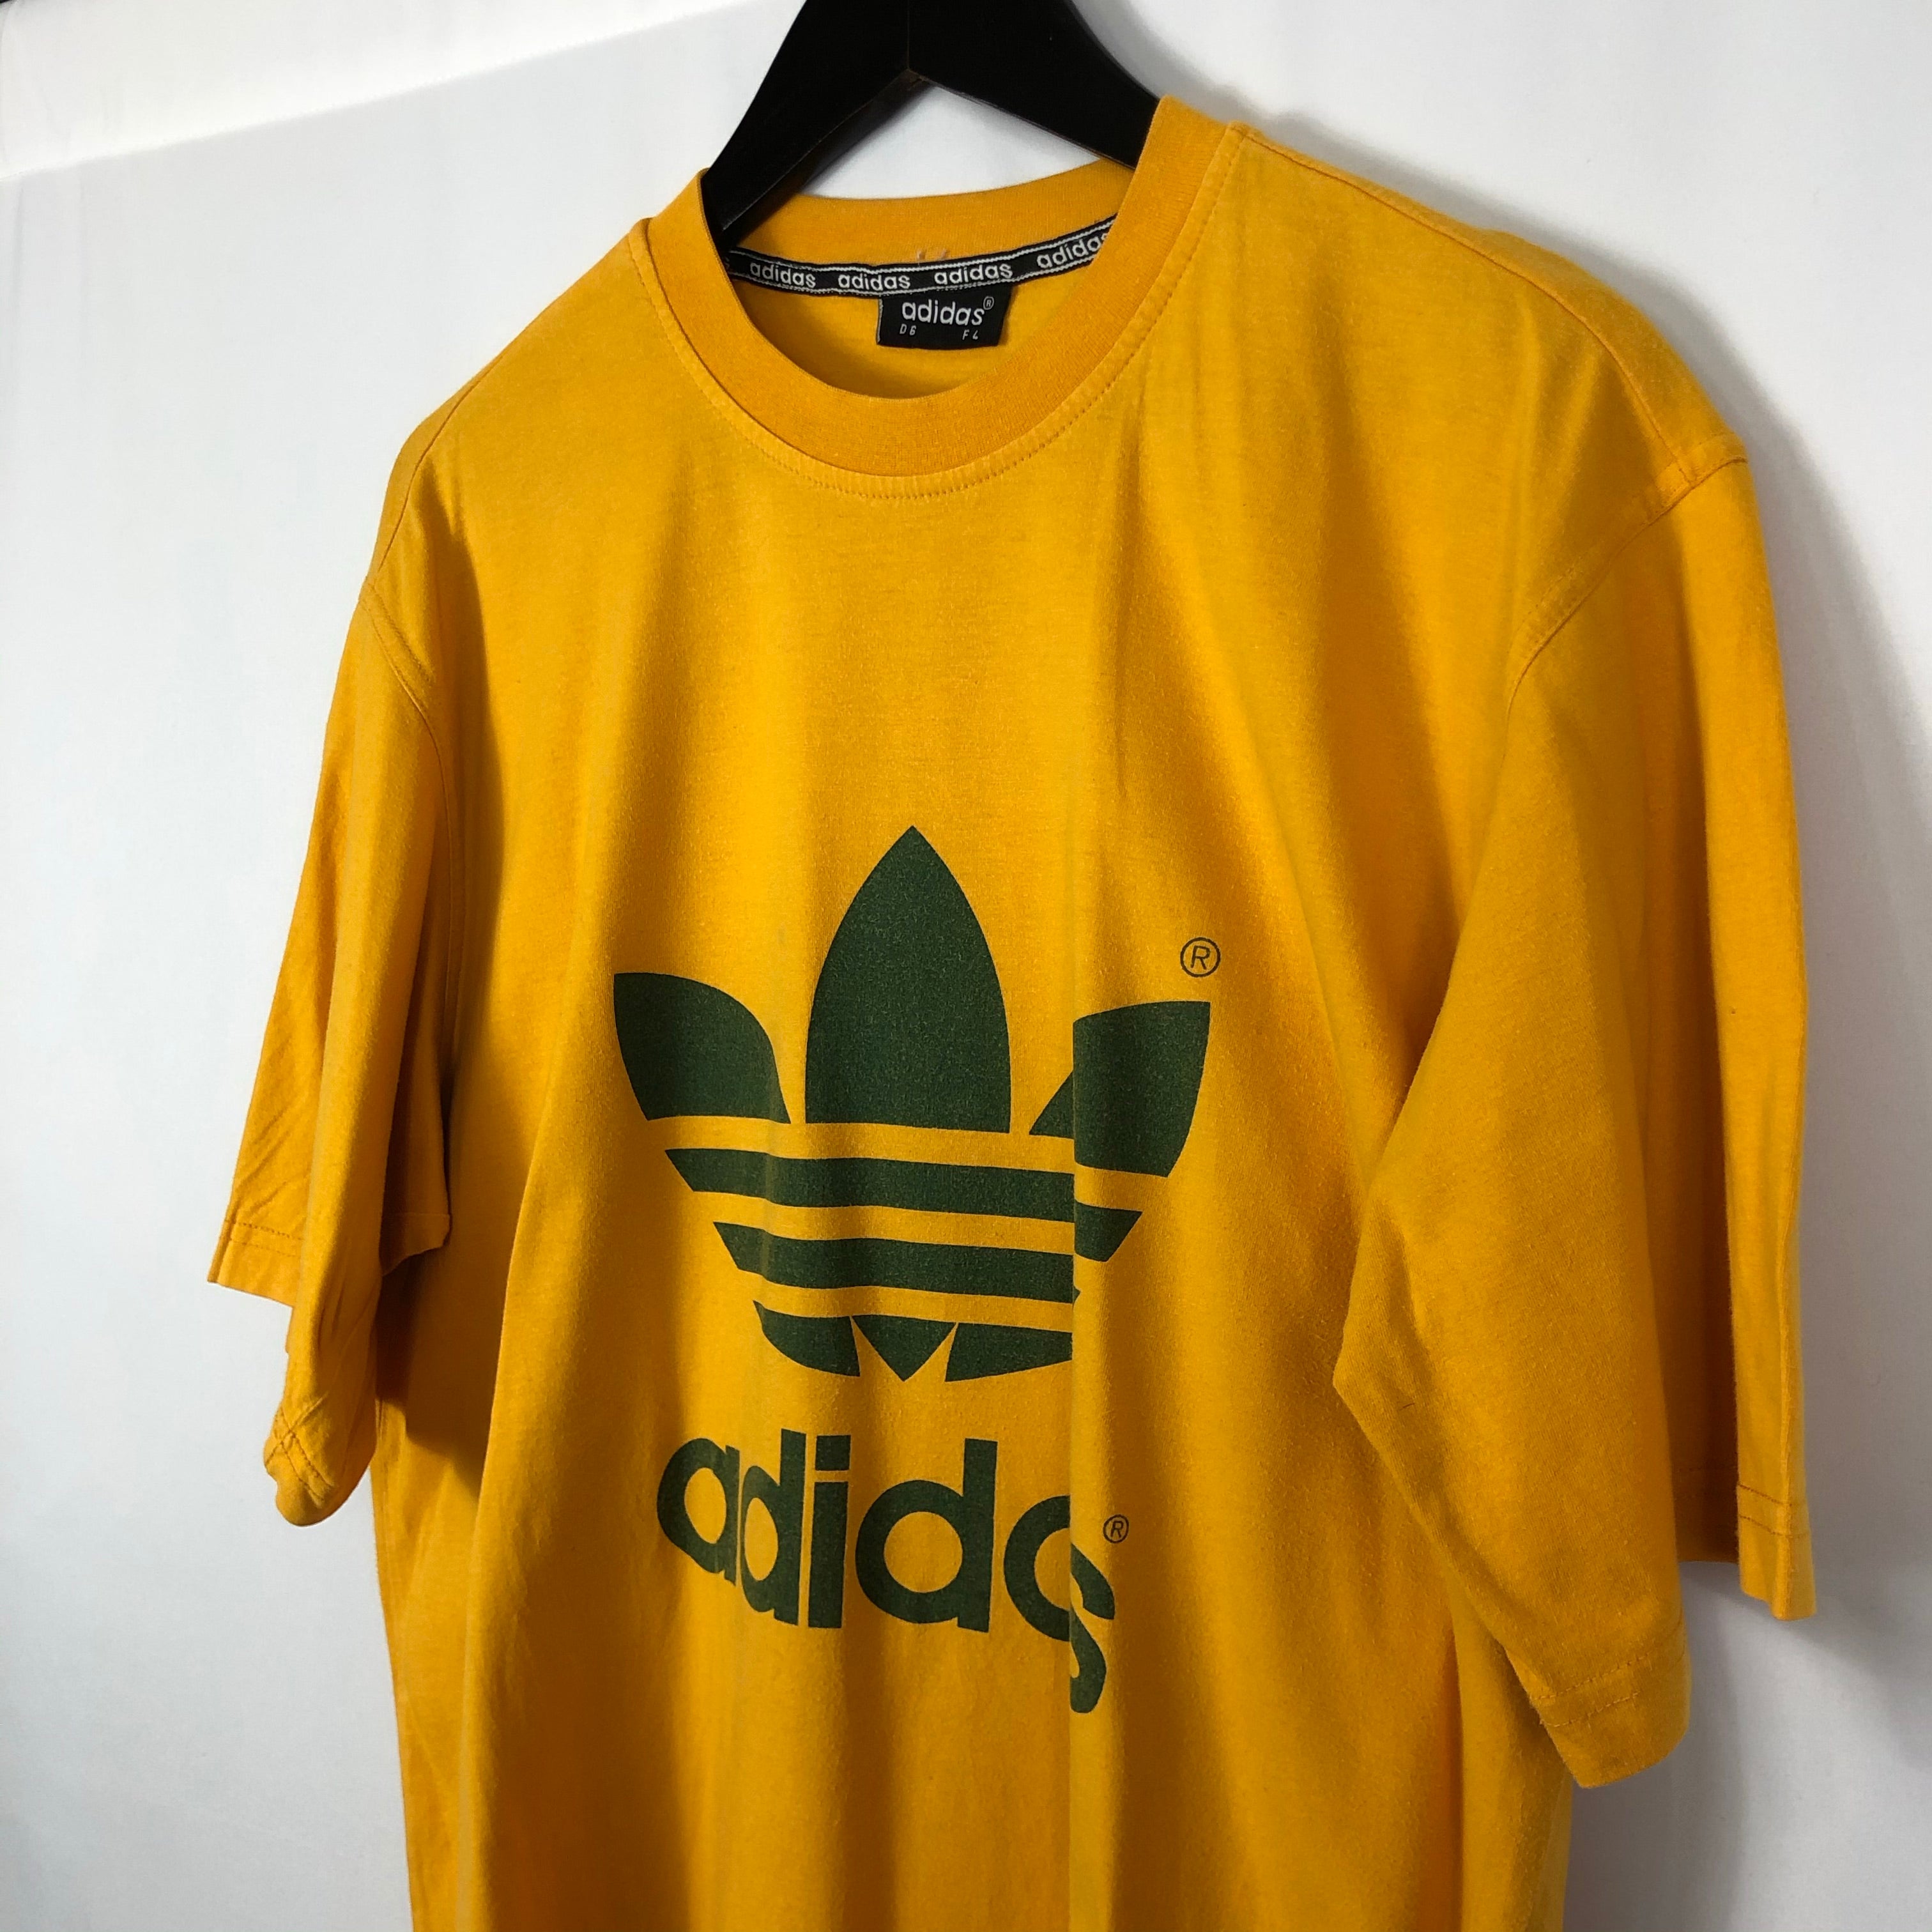 Vintage Adidas Tee in Yellow - Men’s Large/Women’s XL - Vintique Clothing